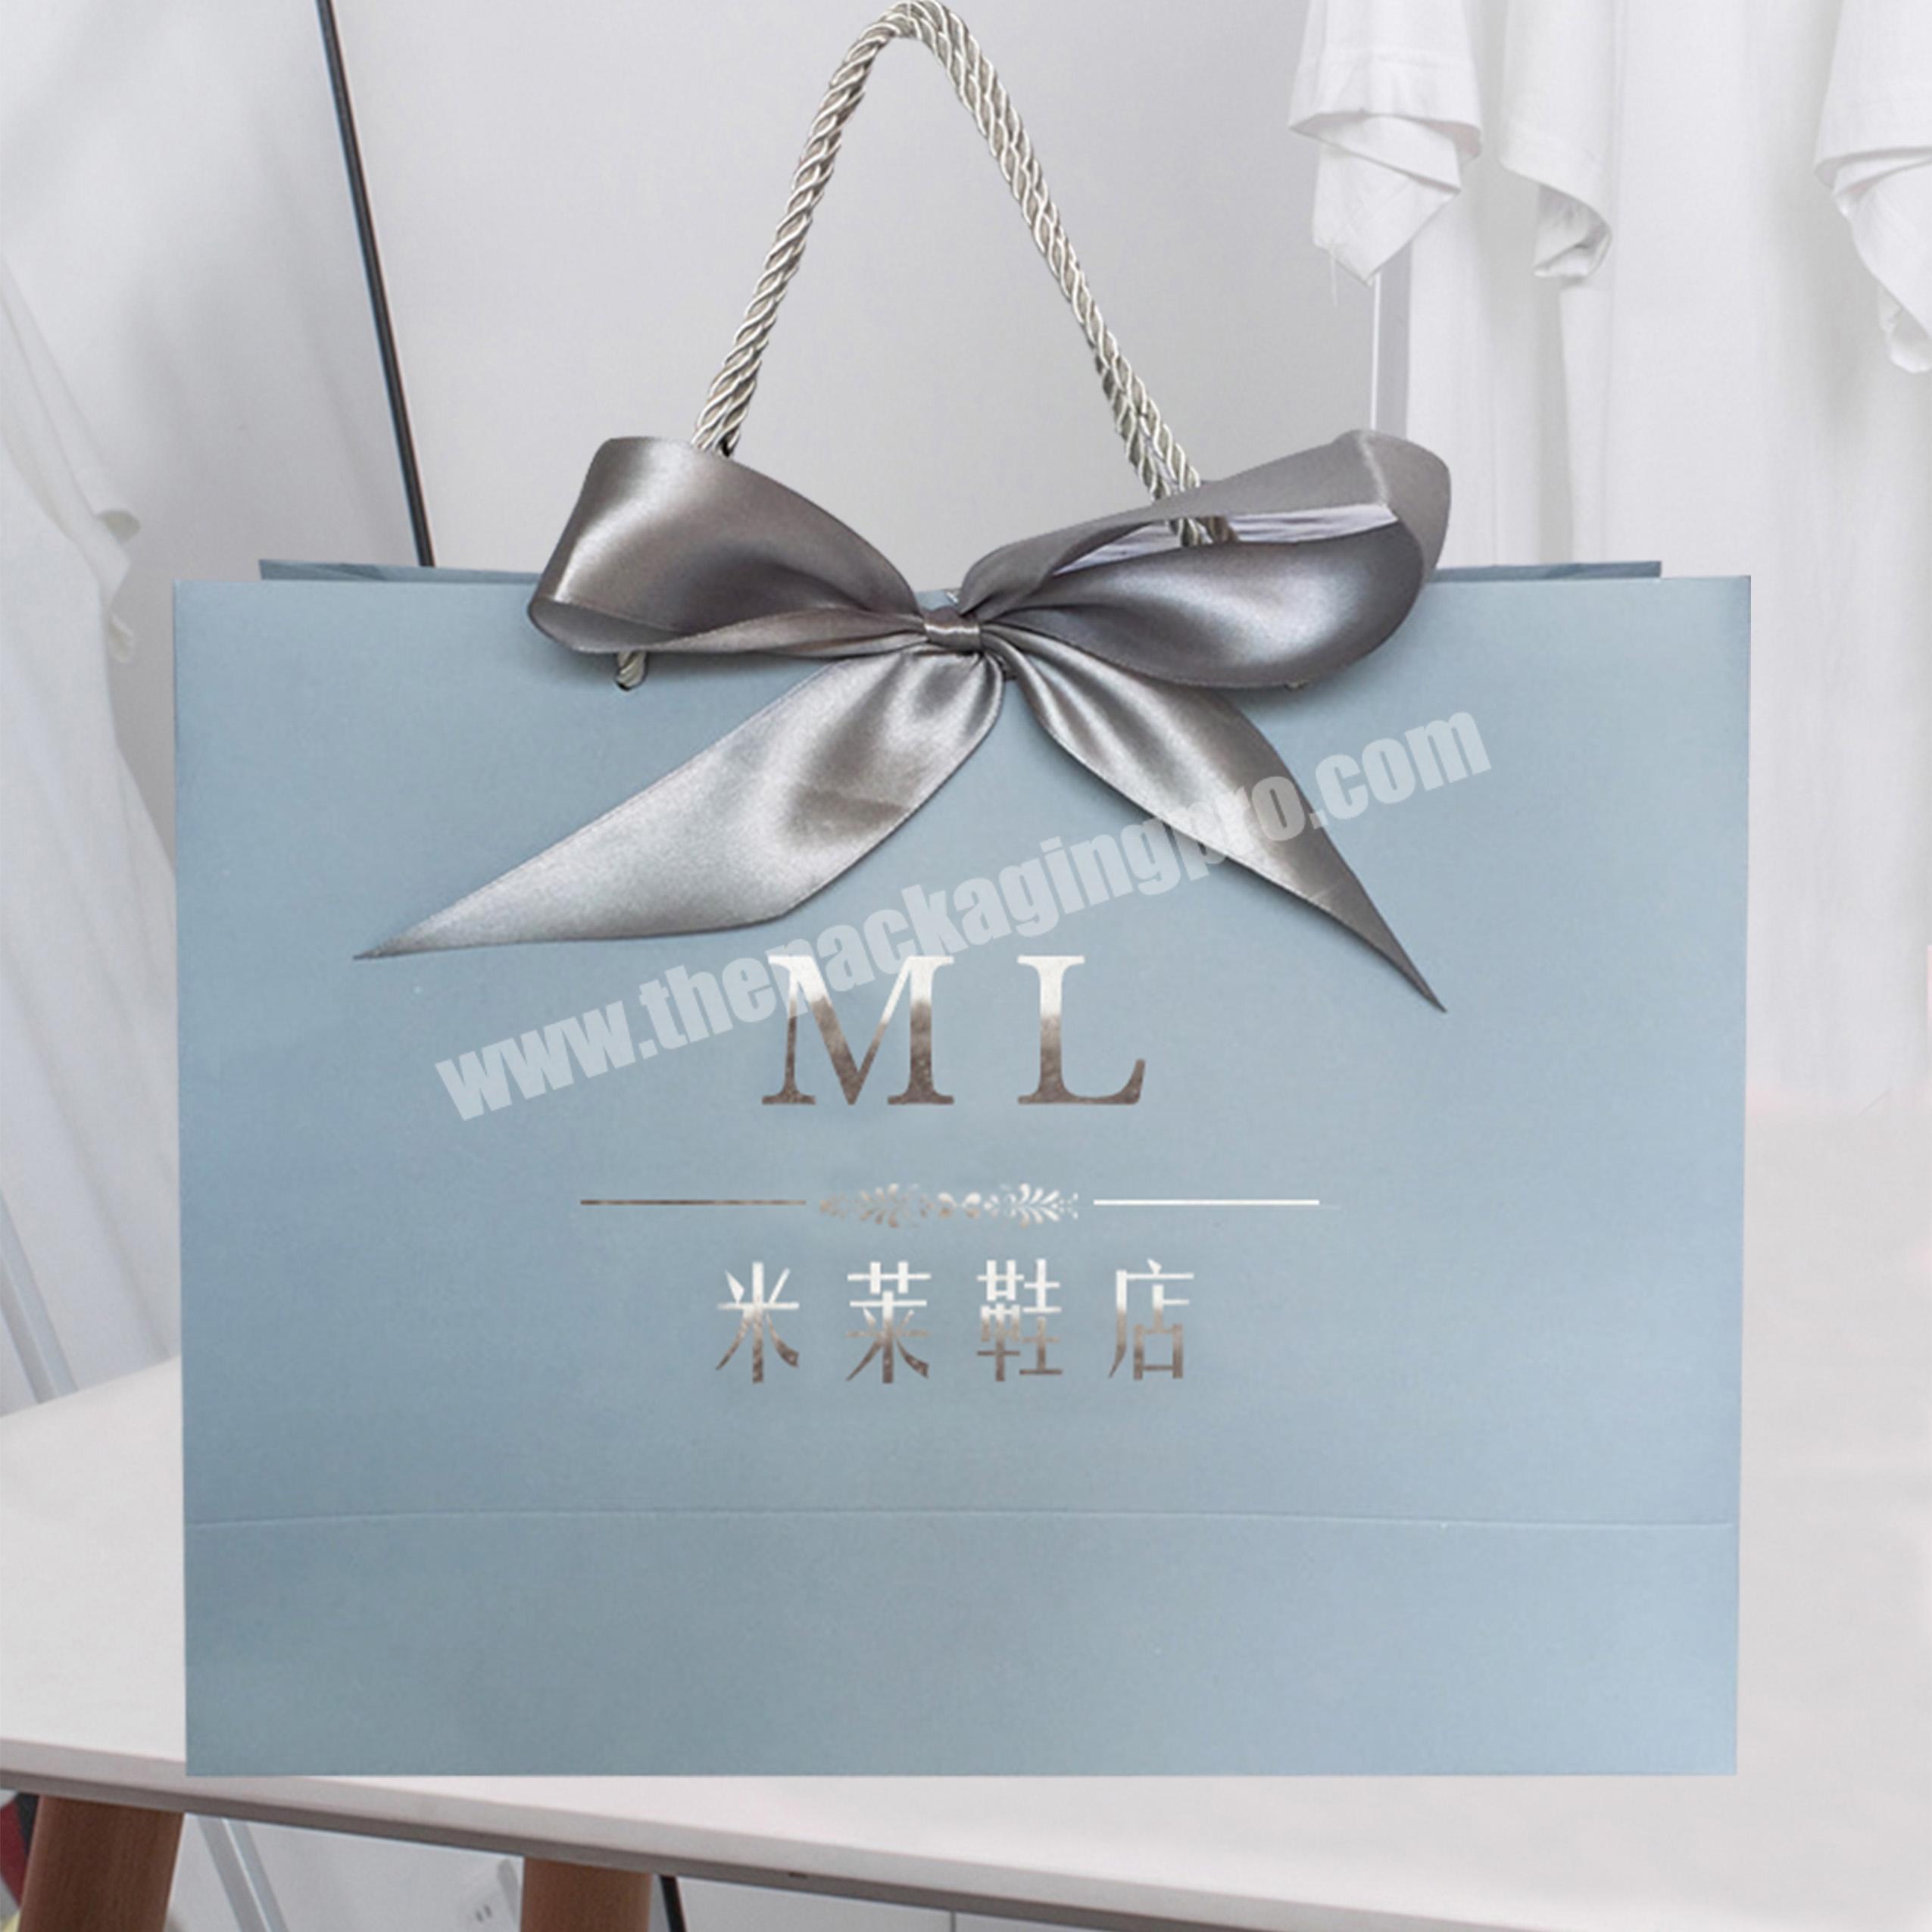 Printed luxury gift bags and boutique bags